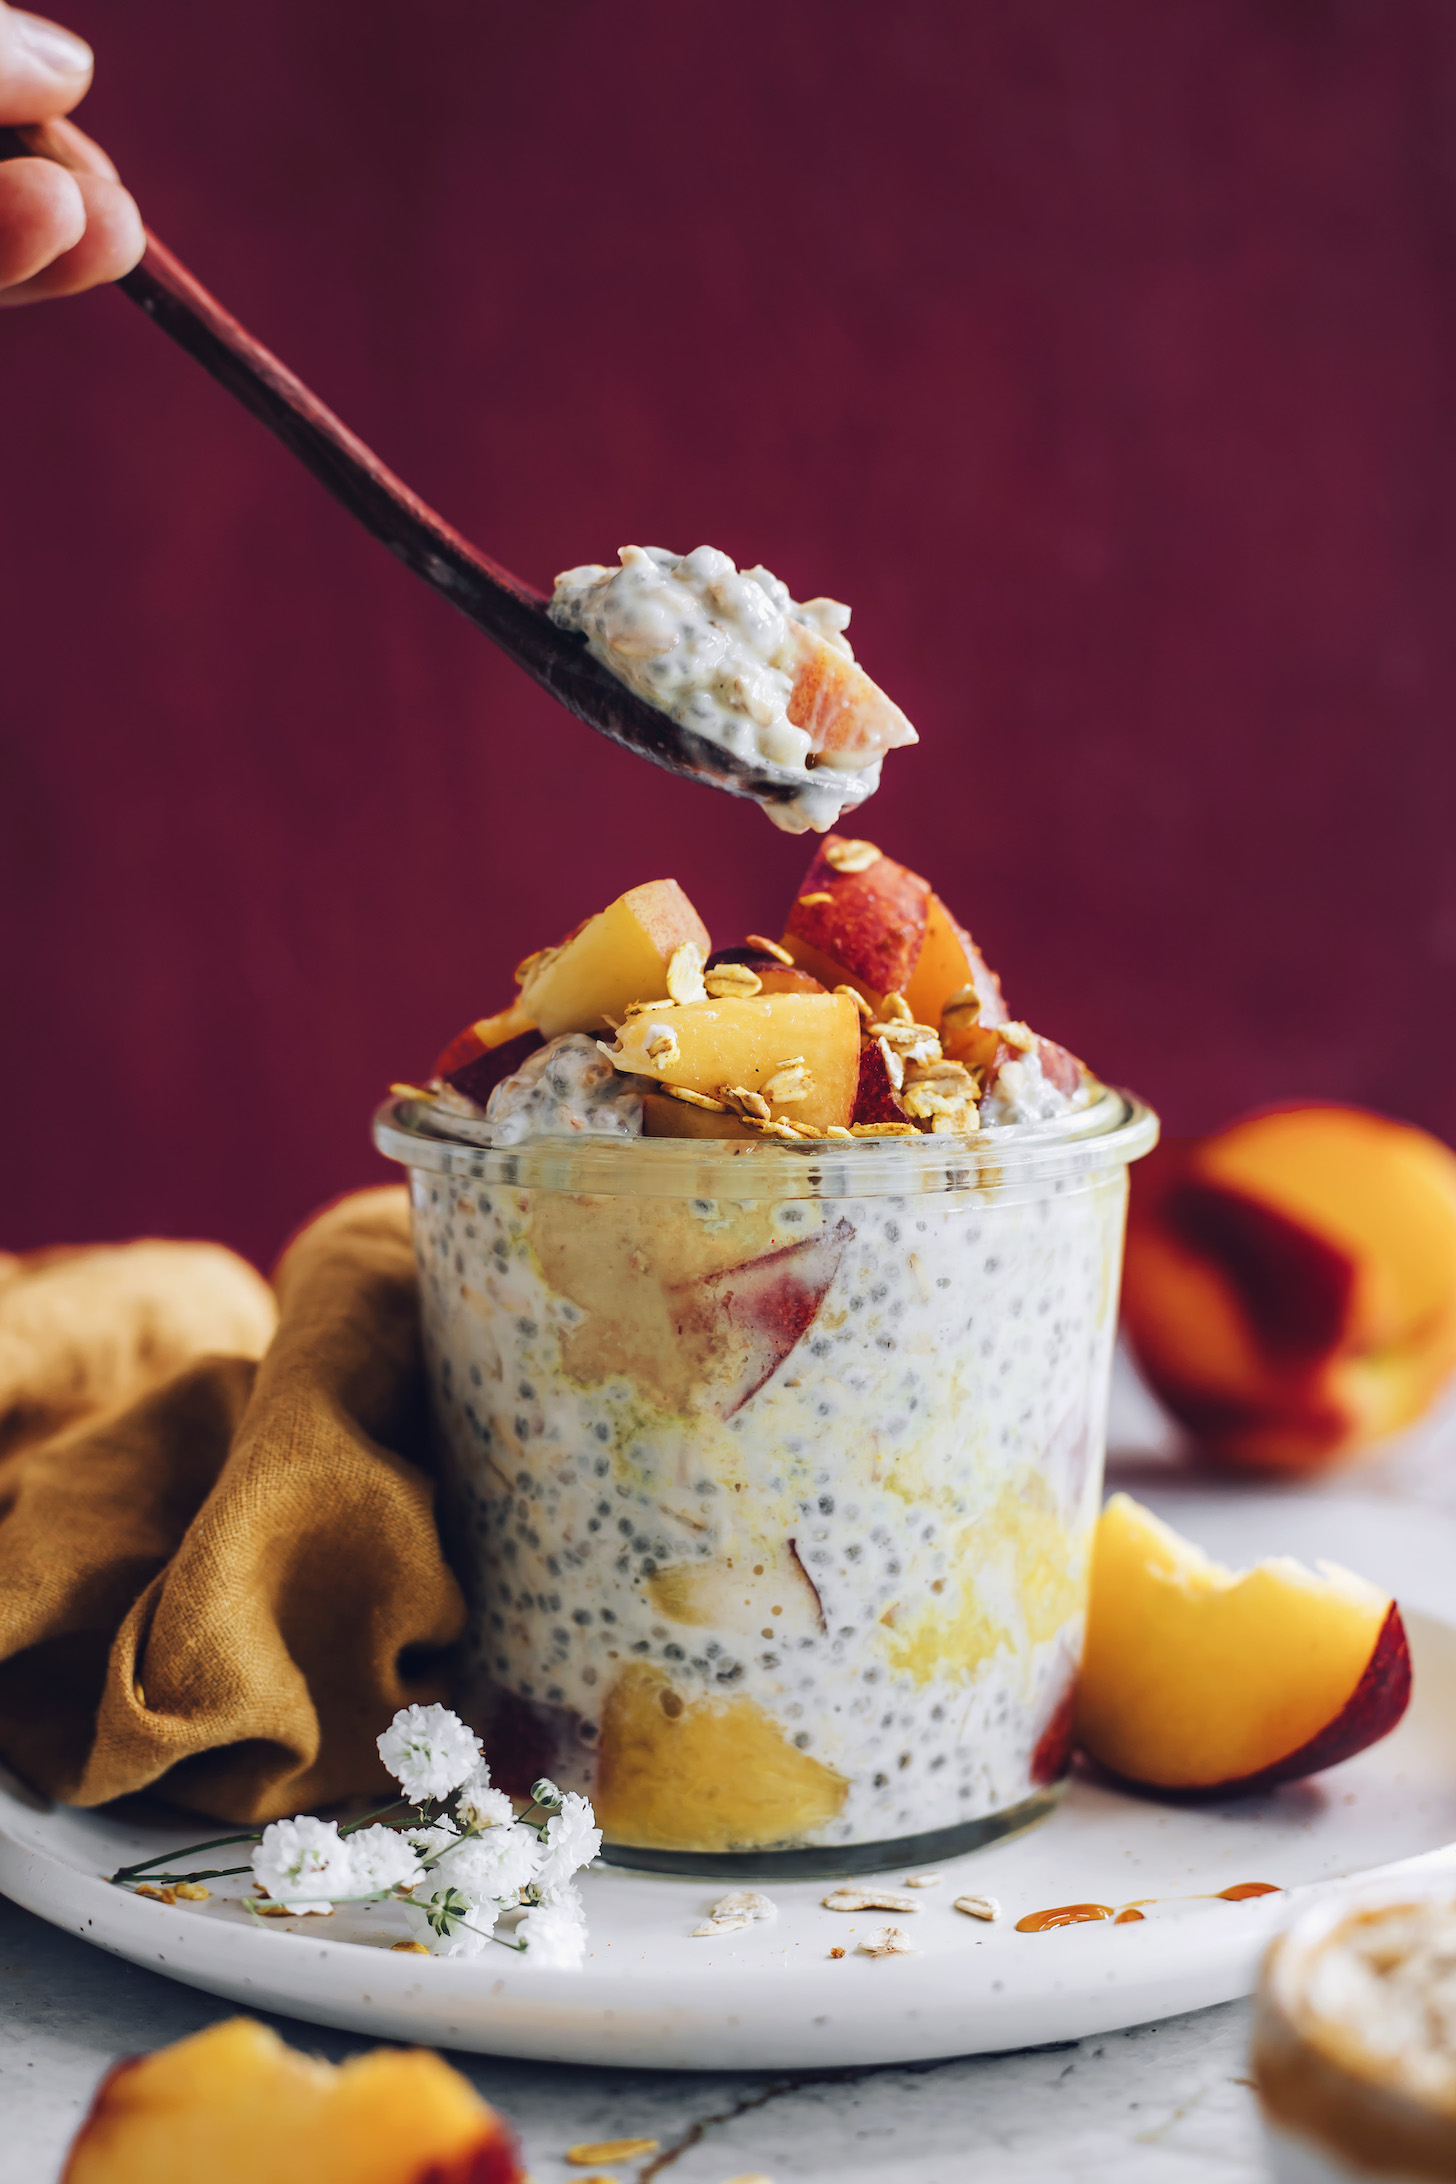 Picking up a bite of peaches and cream overnight oats from a jar